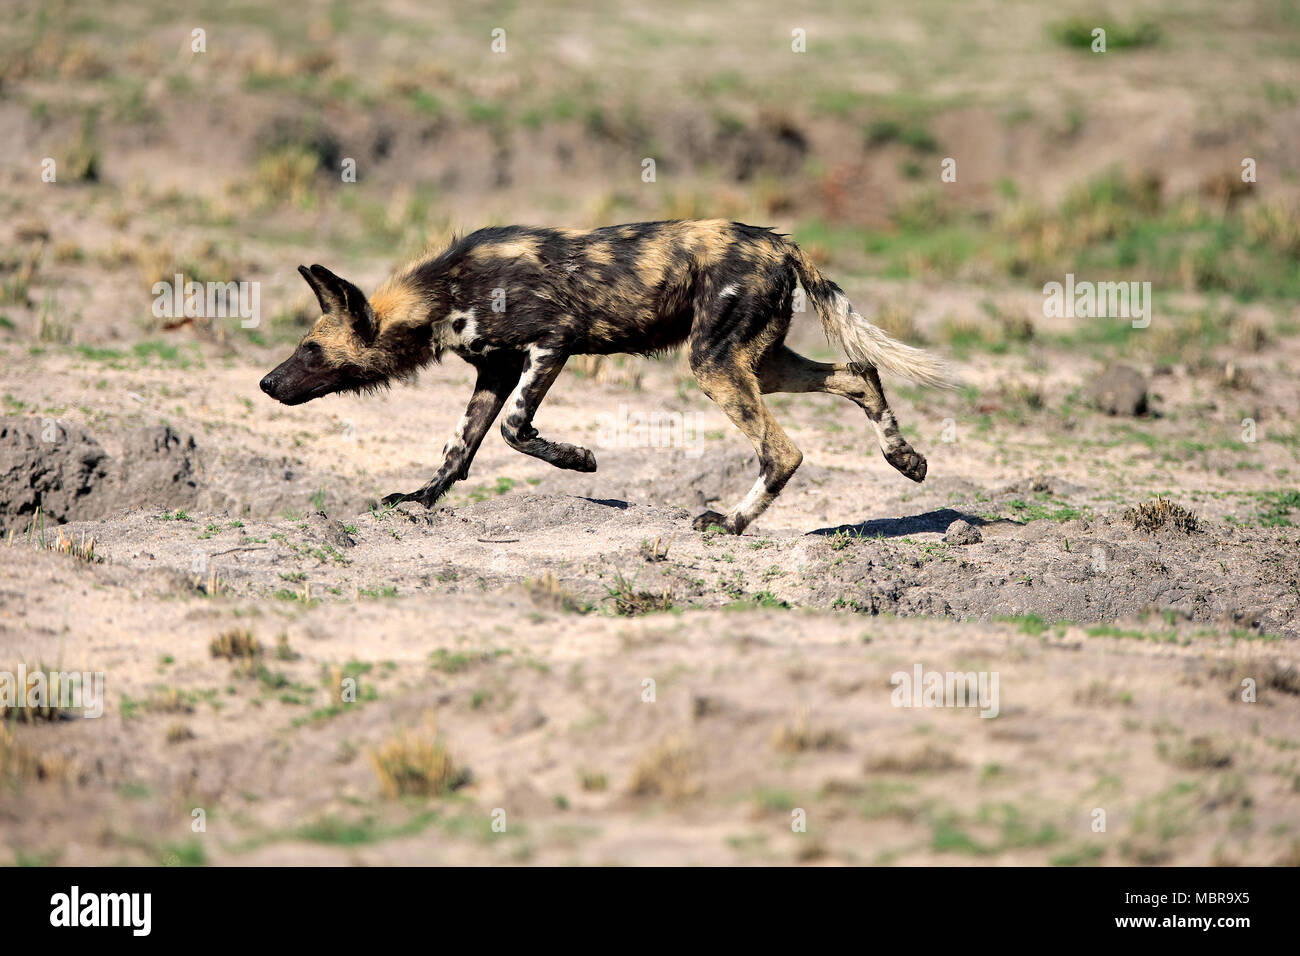 African wild dog (Lycaon pictus), Adulto, caccia, acceso, Sabi Sand Game Reserve, Kruger National Park, Sud Africa Foto Stock